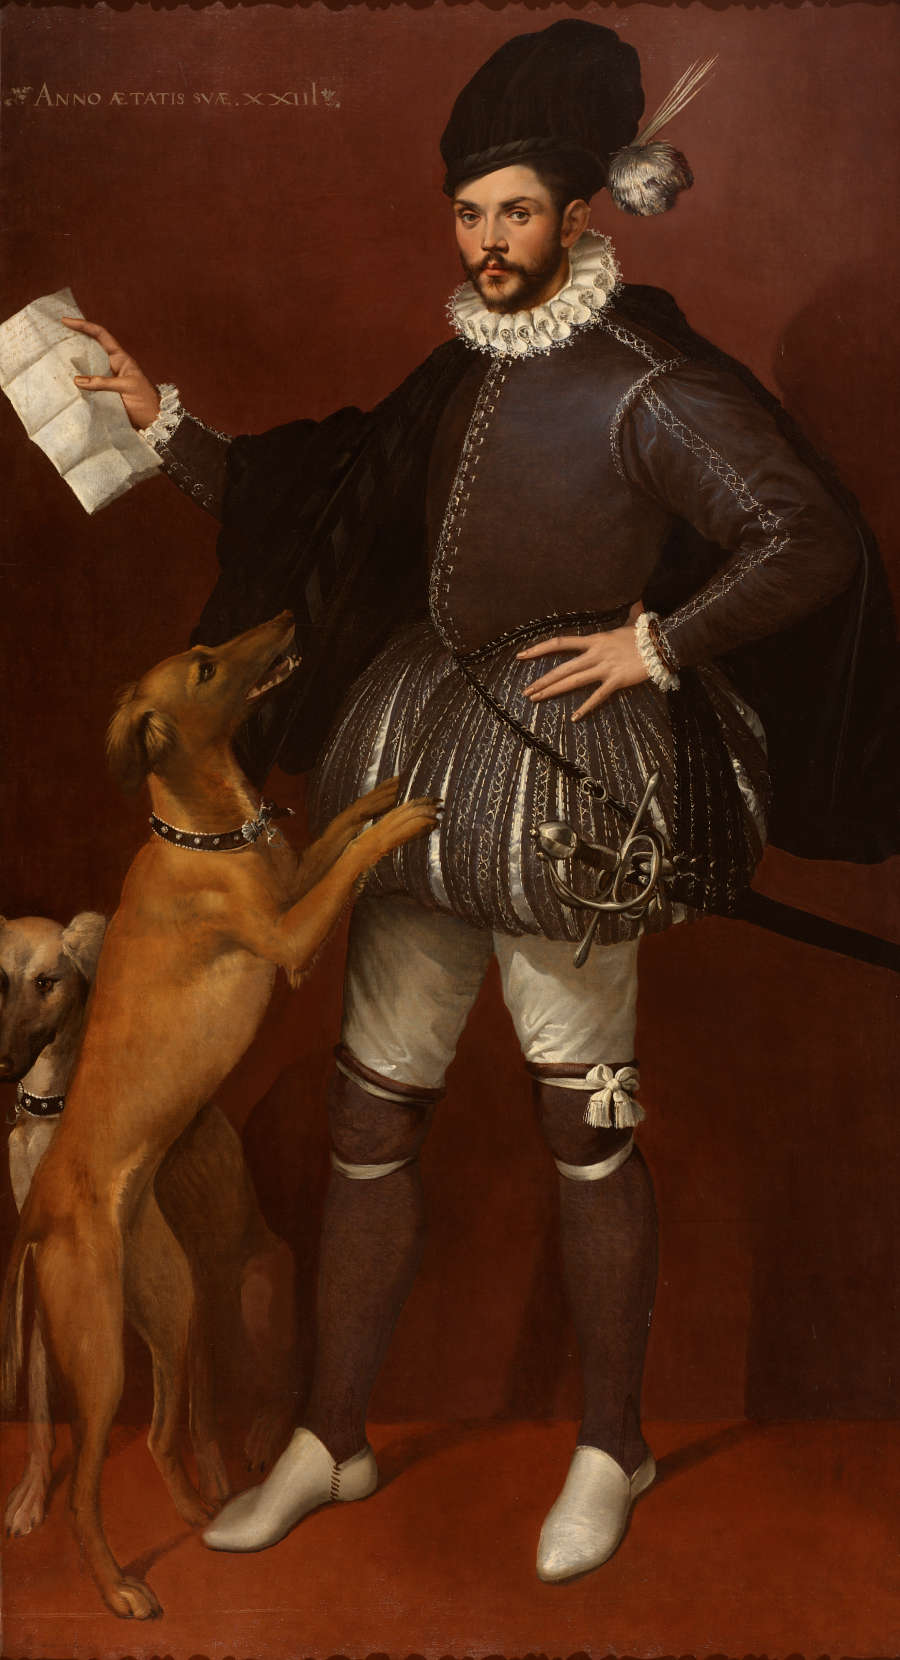 A lavishly dressed, bearded, European gentleman holding up a letter in his left hand. He has a sword at his right side and is ignoring two dogs.